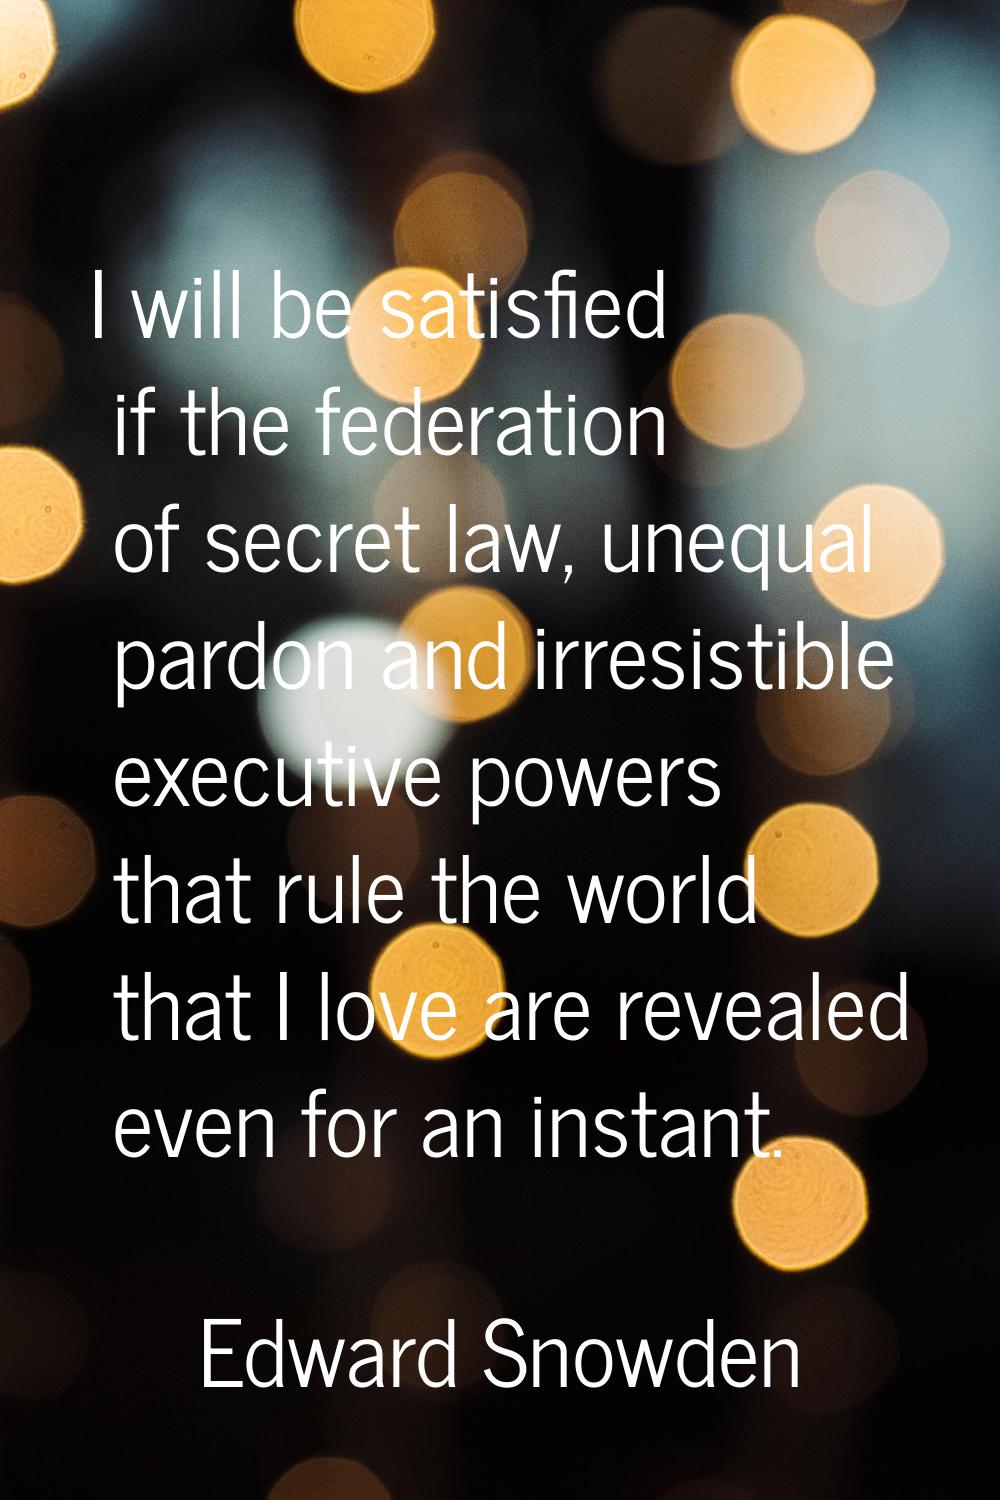 I will be satisfied if the federation of secret law, unequal pardon and irresistible executive powe